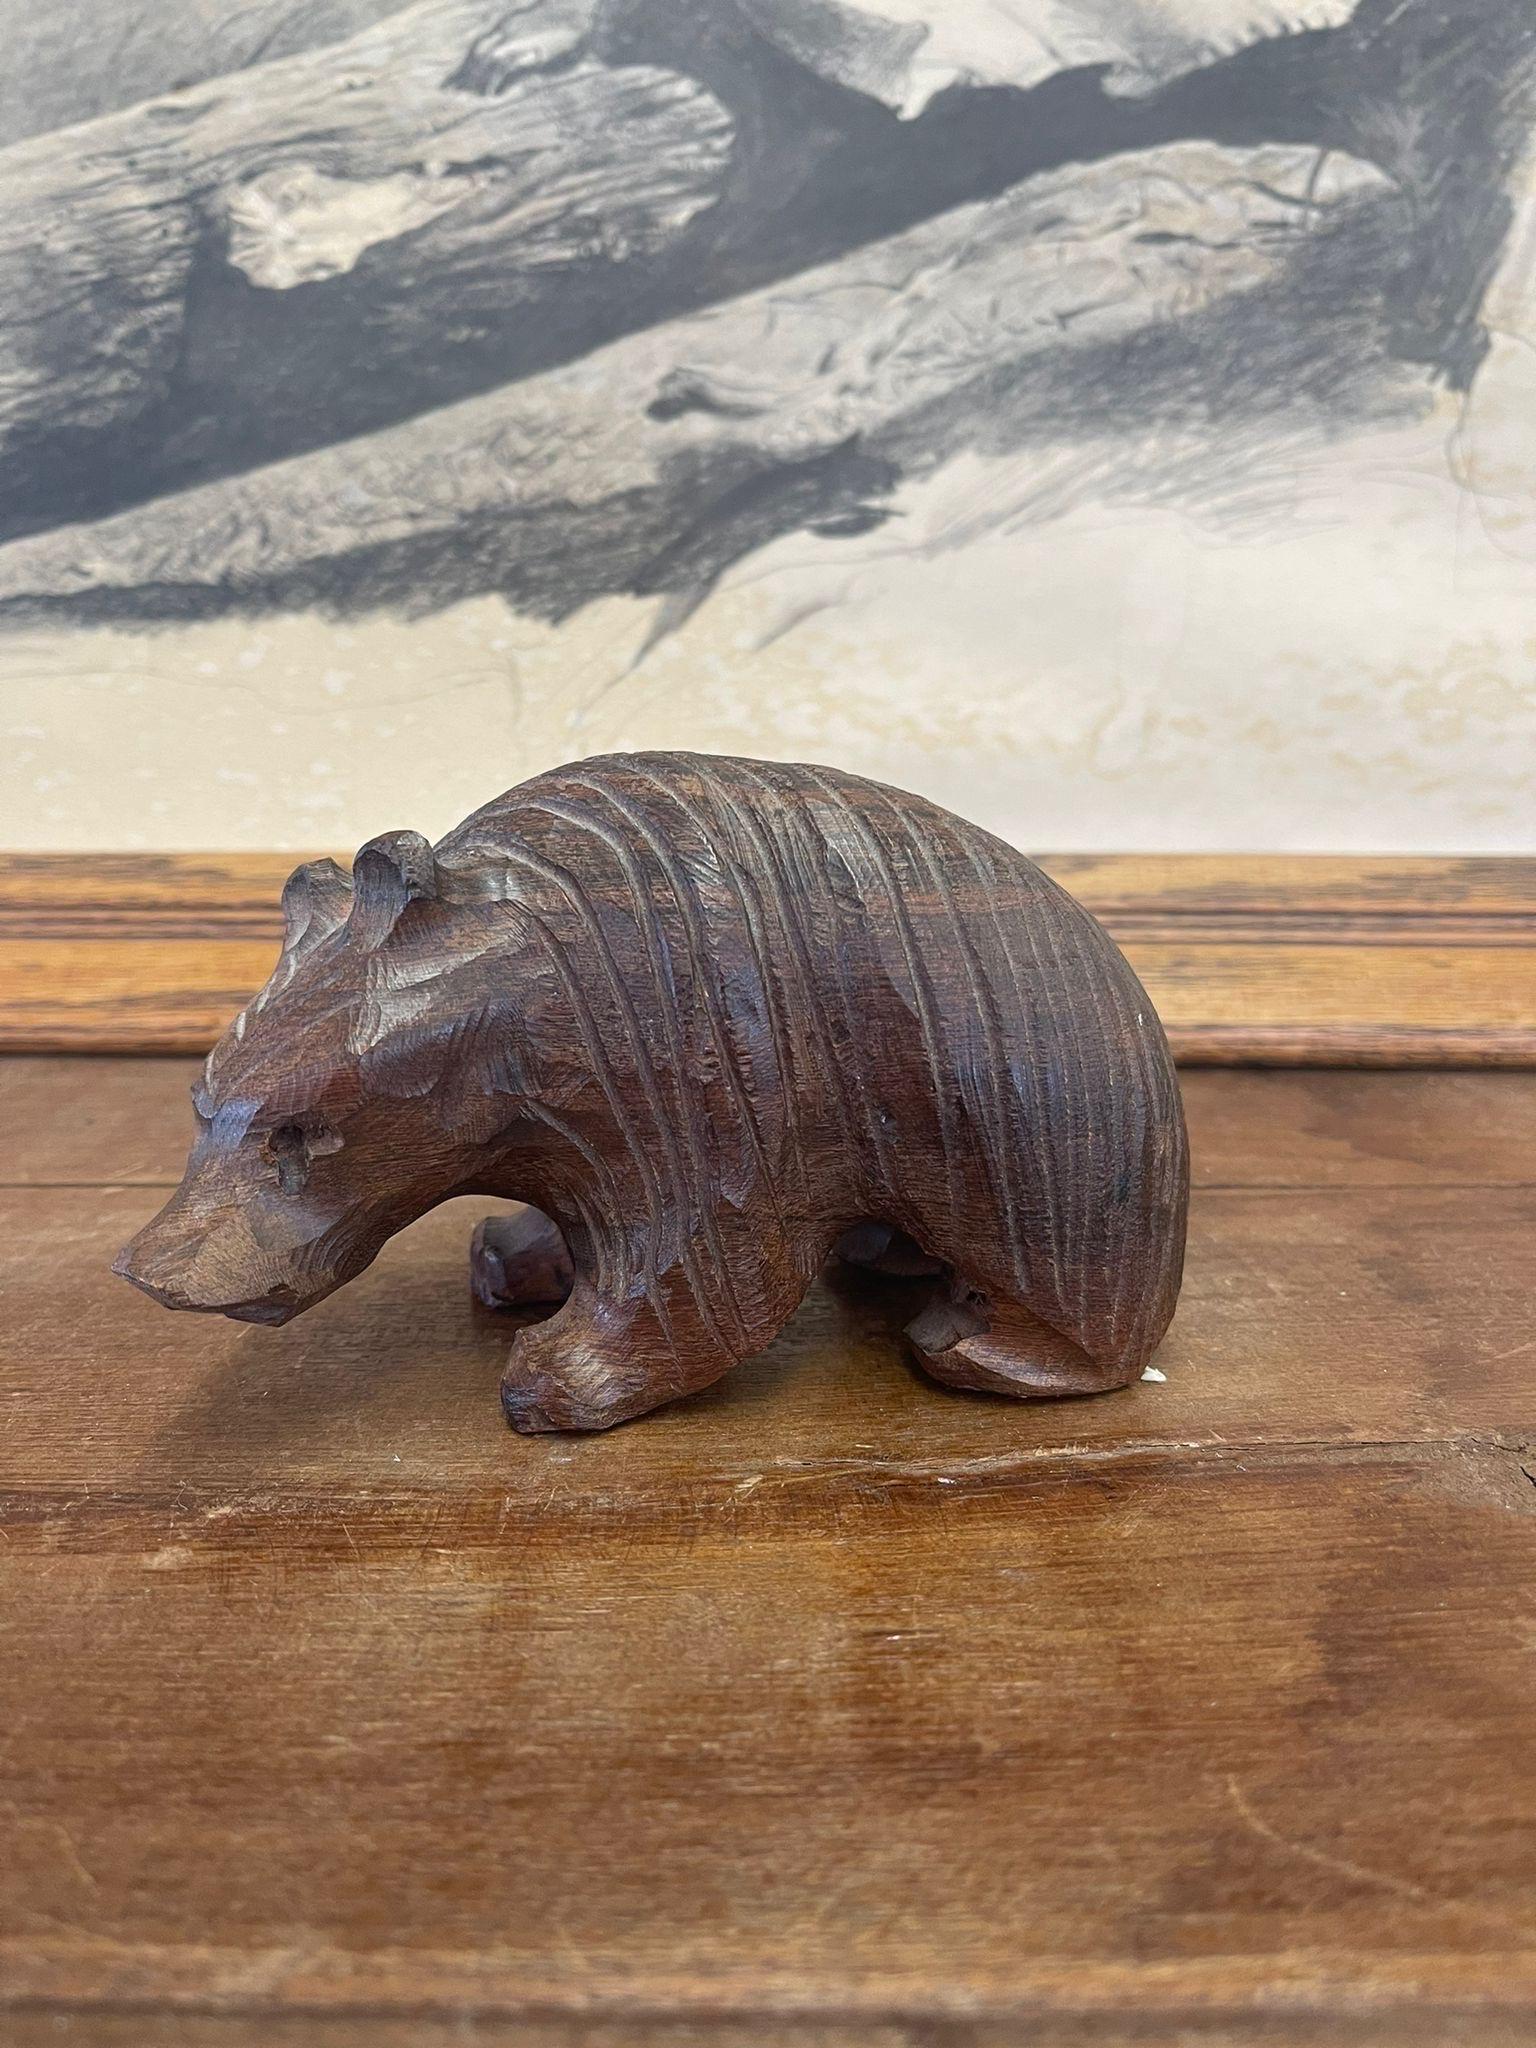 Bear Figurine with striped design and dark wood tone. Hand Carved detailing. No Makers mark. Vintage Condition Consistent with Age as Pictured.

Dimensions. 6 W ; 3 D ; 4 H